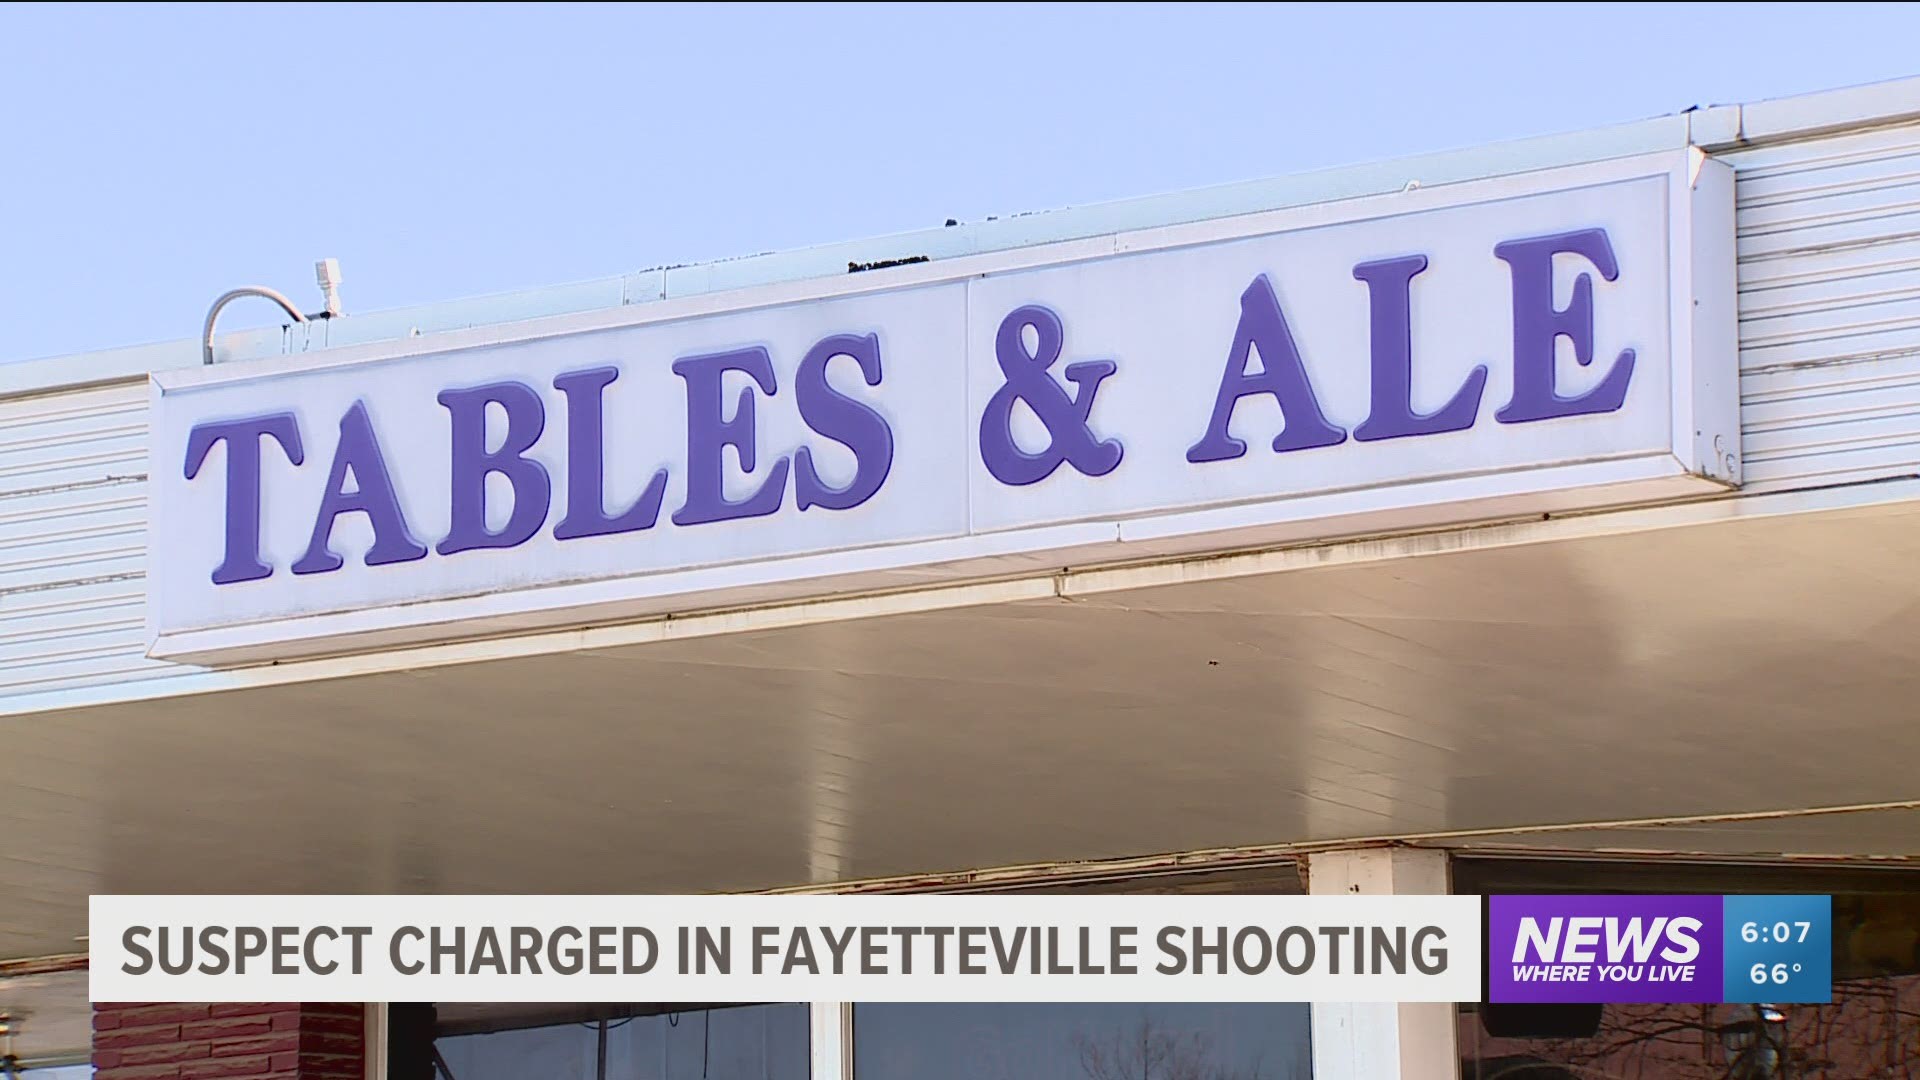 Suspect charged in Fayetteville shooting